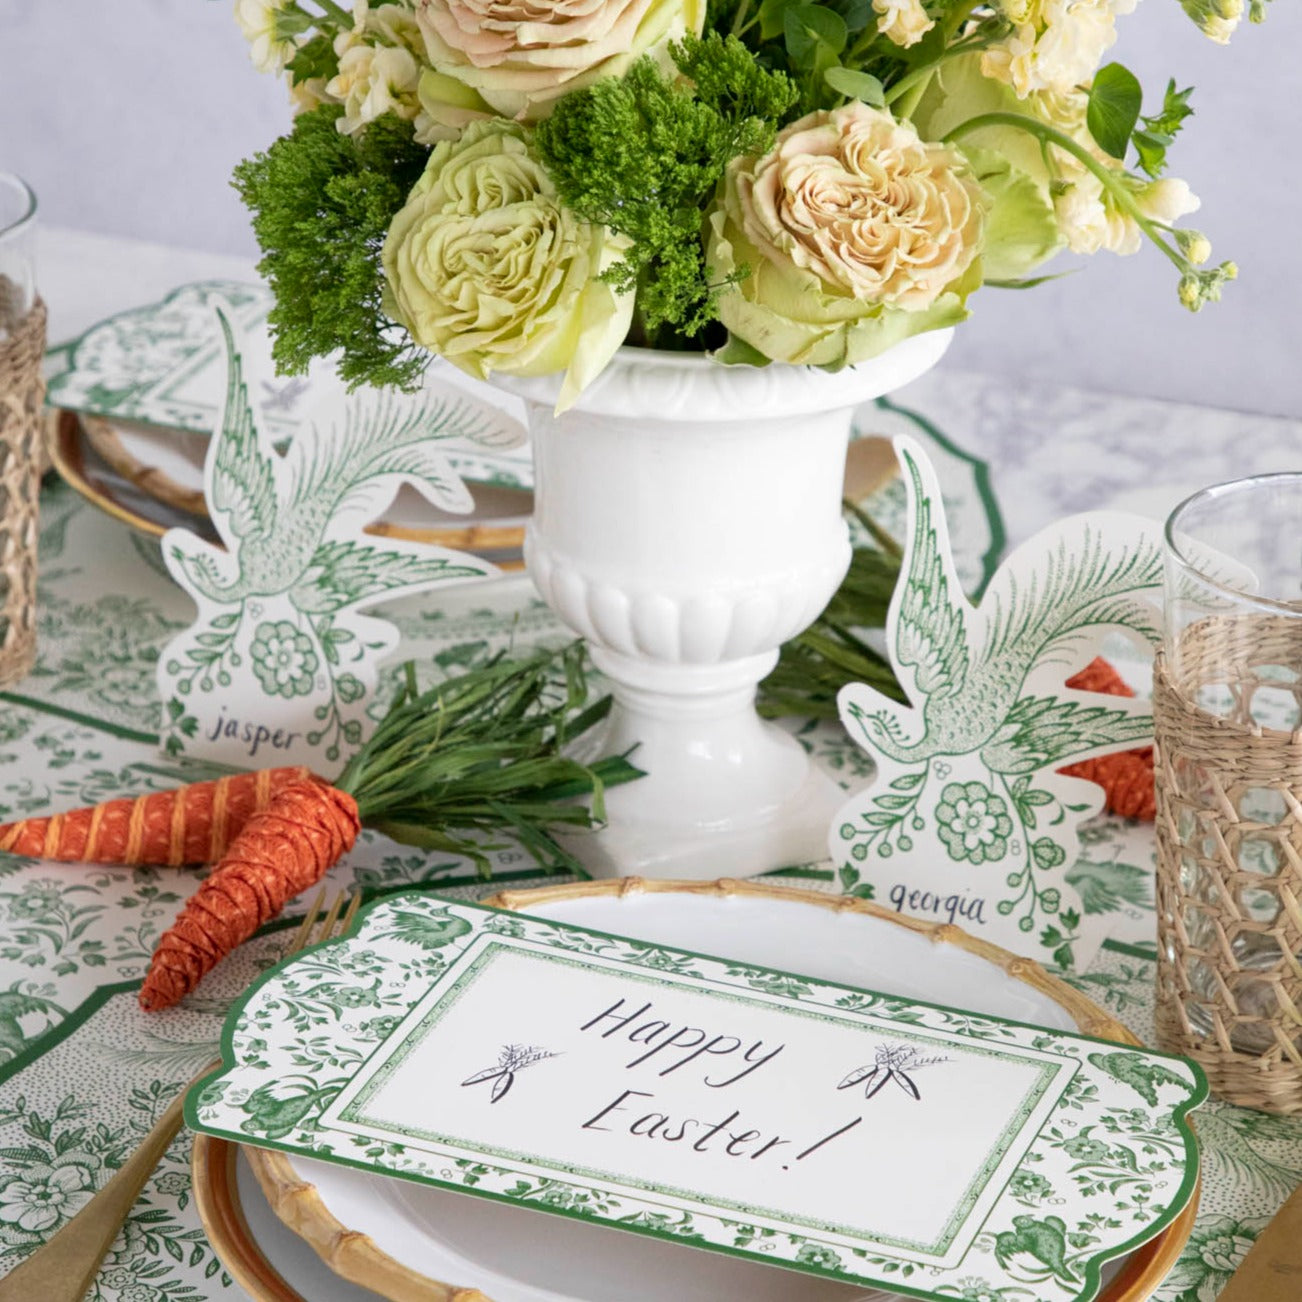 An Easter table setting with flowers, Green Asiatic Pheasants place cards by Hester &amp; Cook, and a bunny to make guests feel invited.